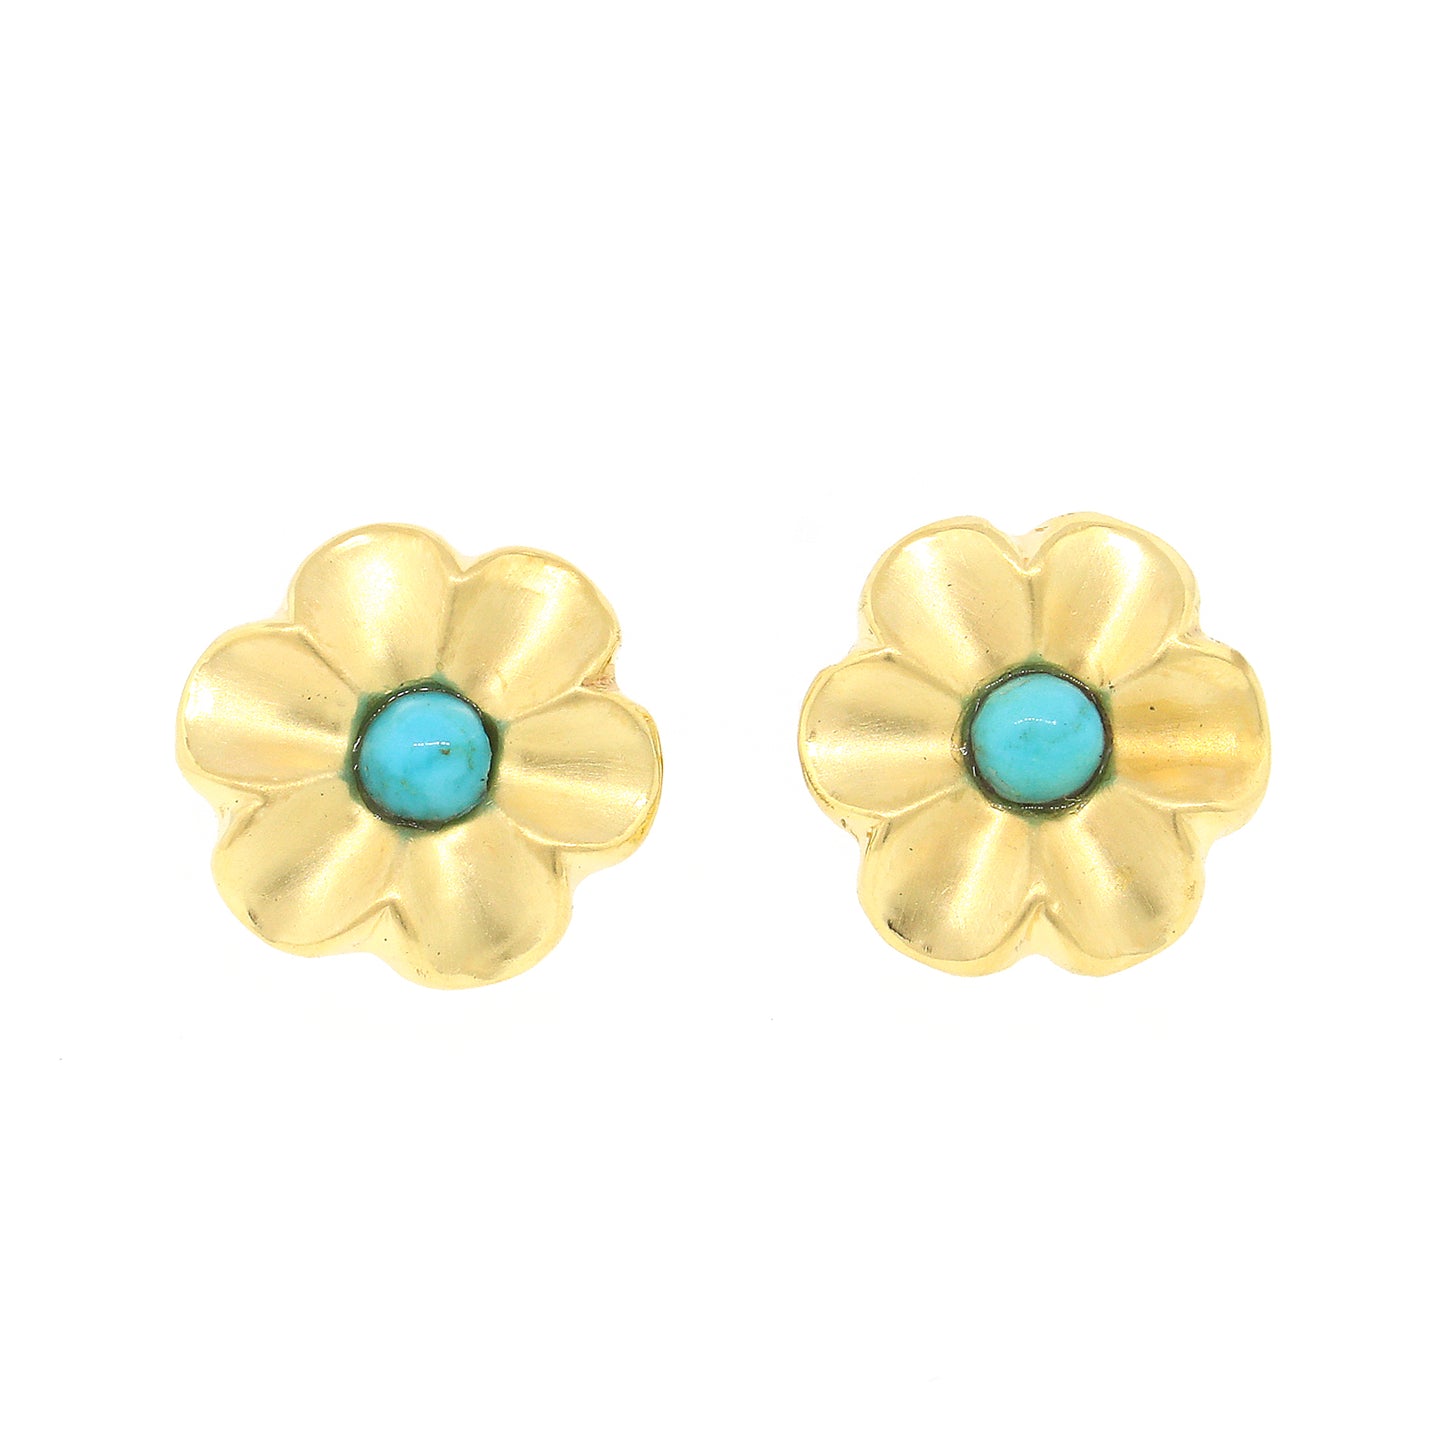 Lovely Turquoise Floral Earrings